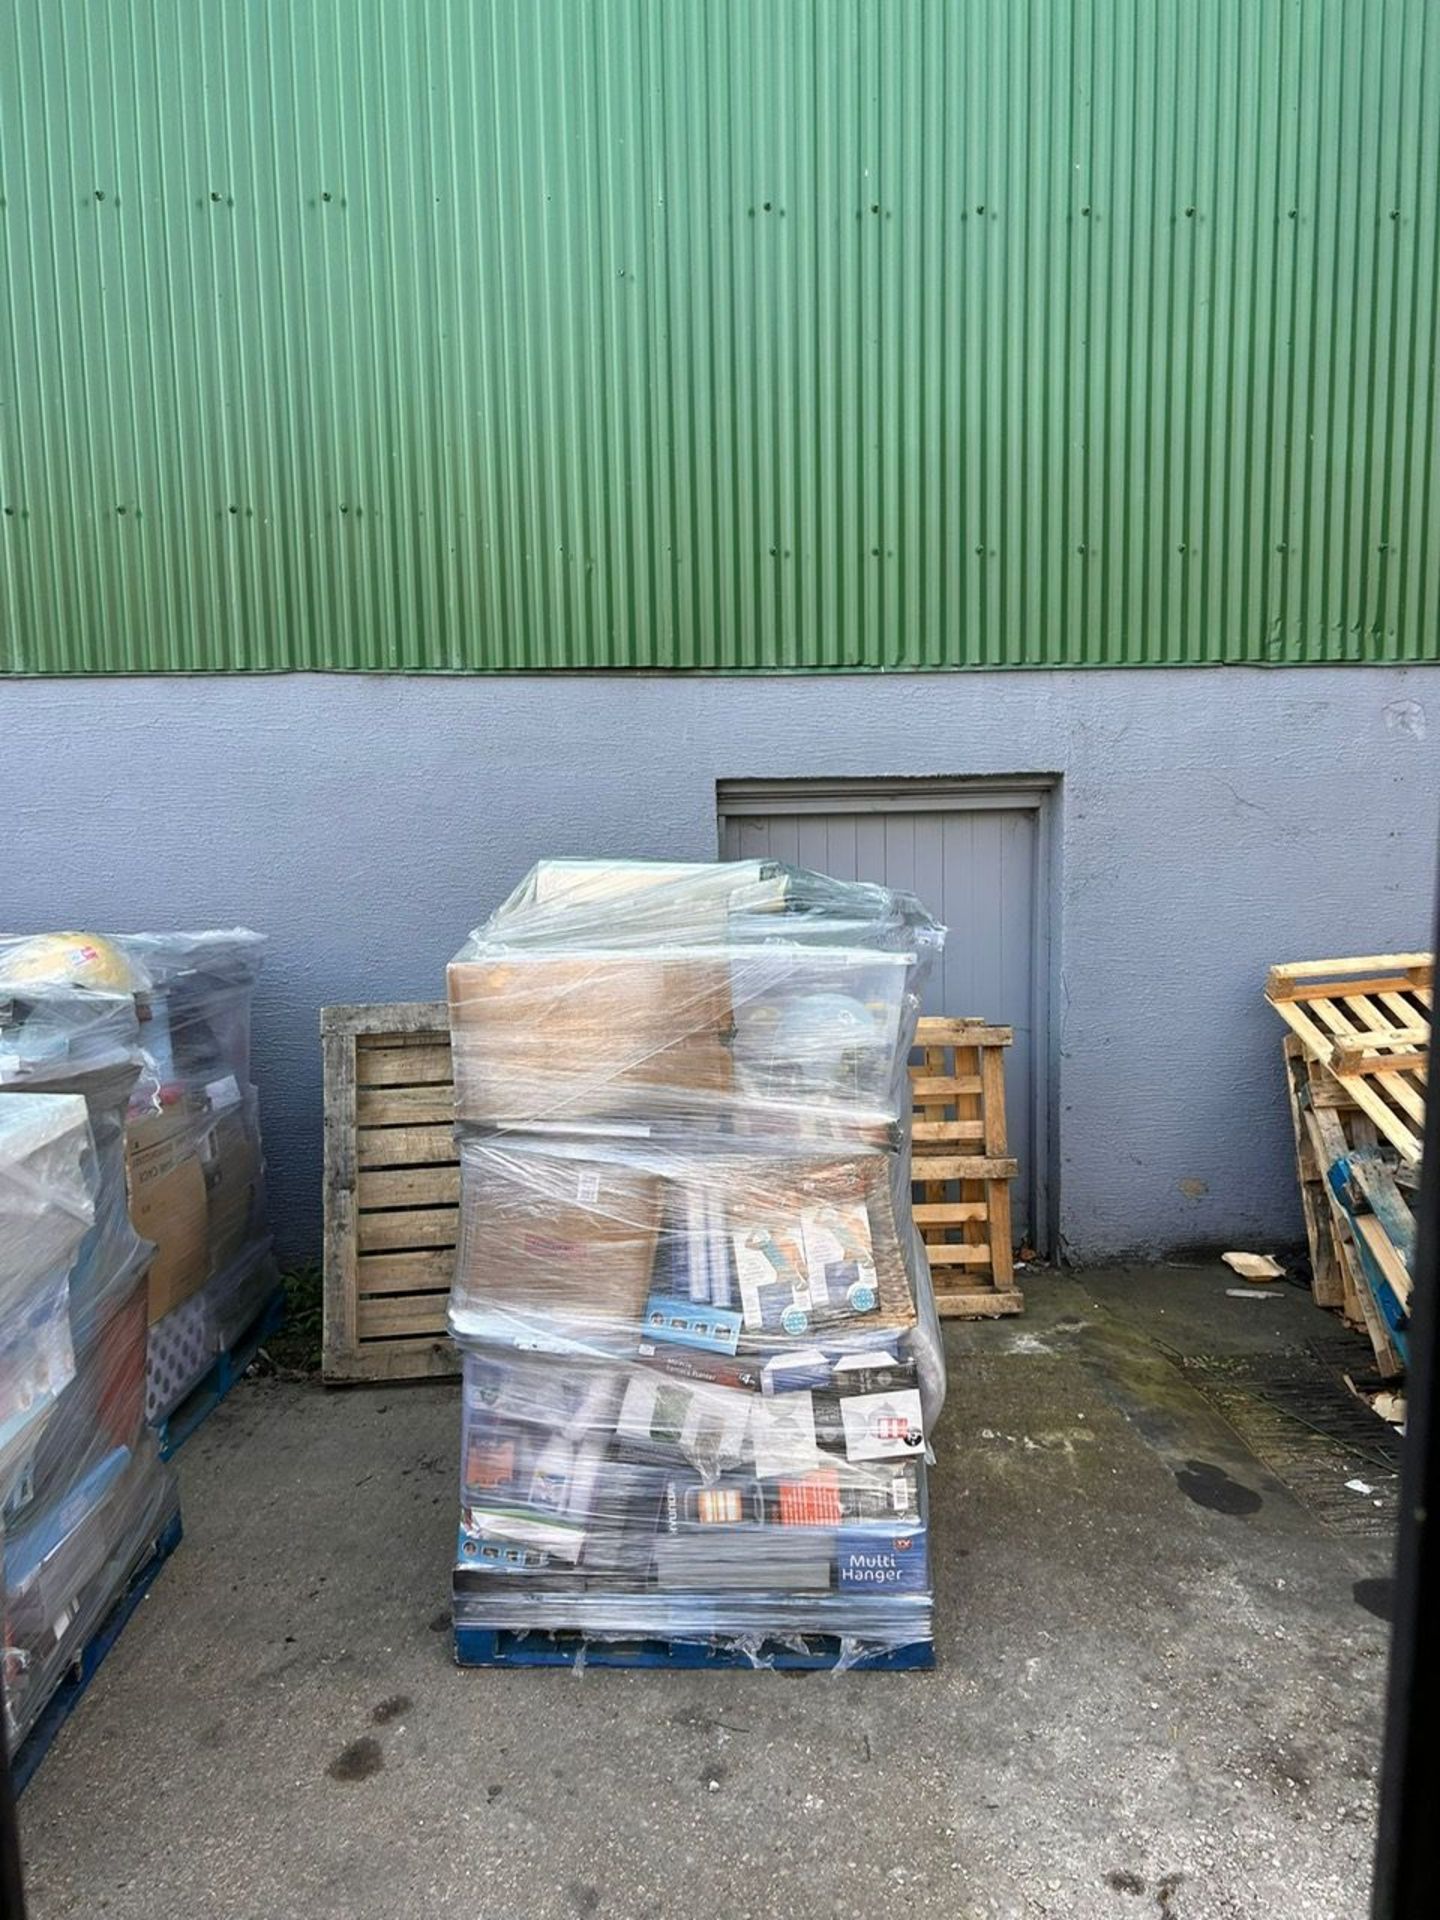 10 X Large Pallet of Unchecked Supermarket Stock. Huge variety of items which may include: tools, - Image 14 of 14